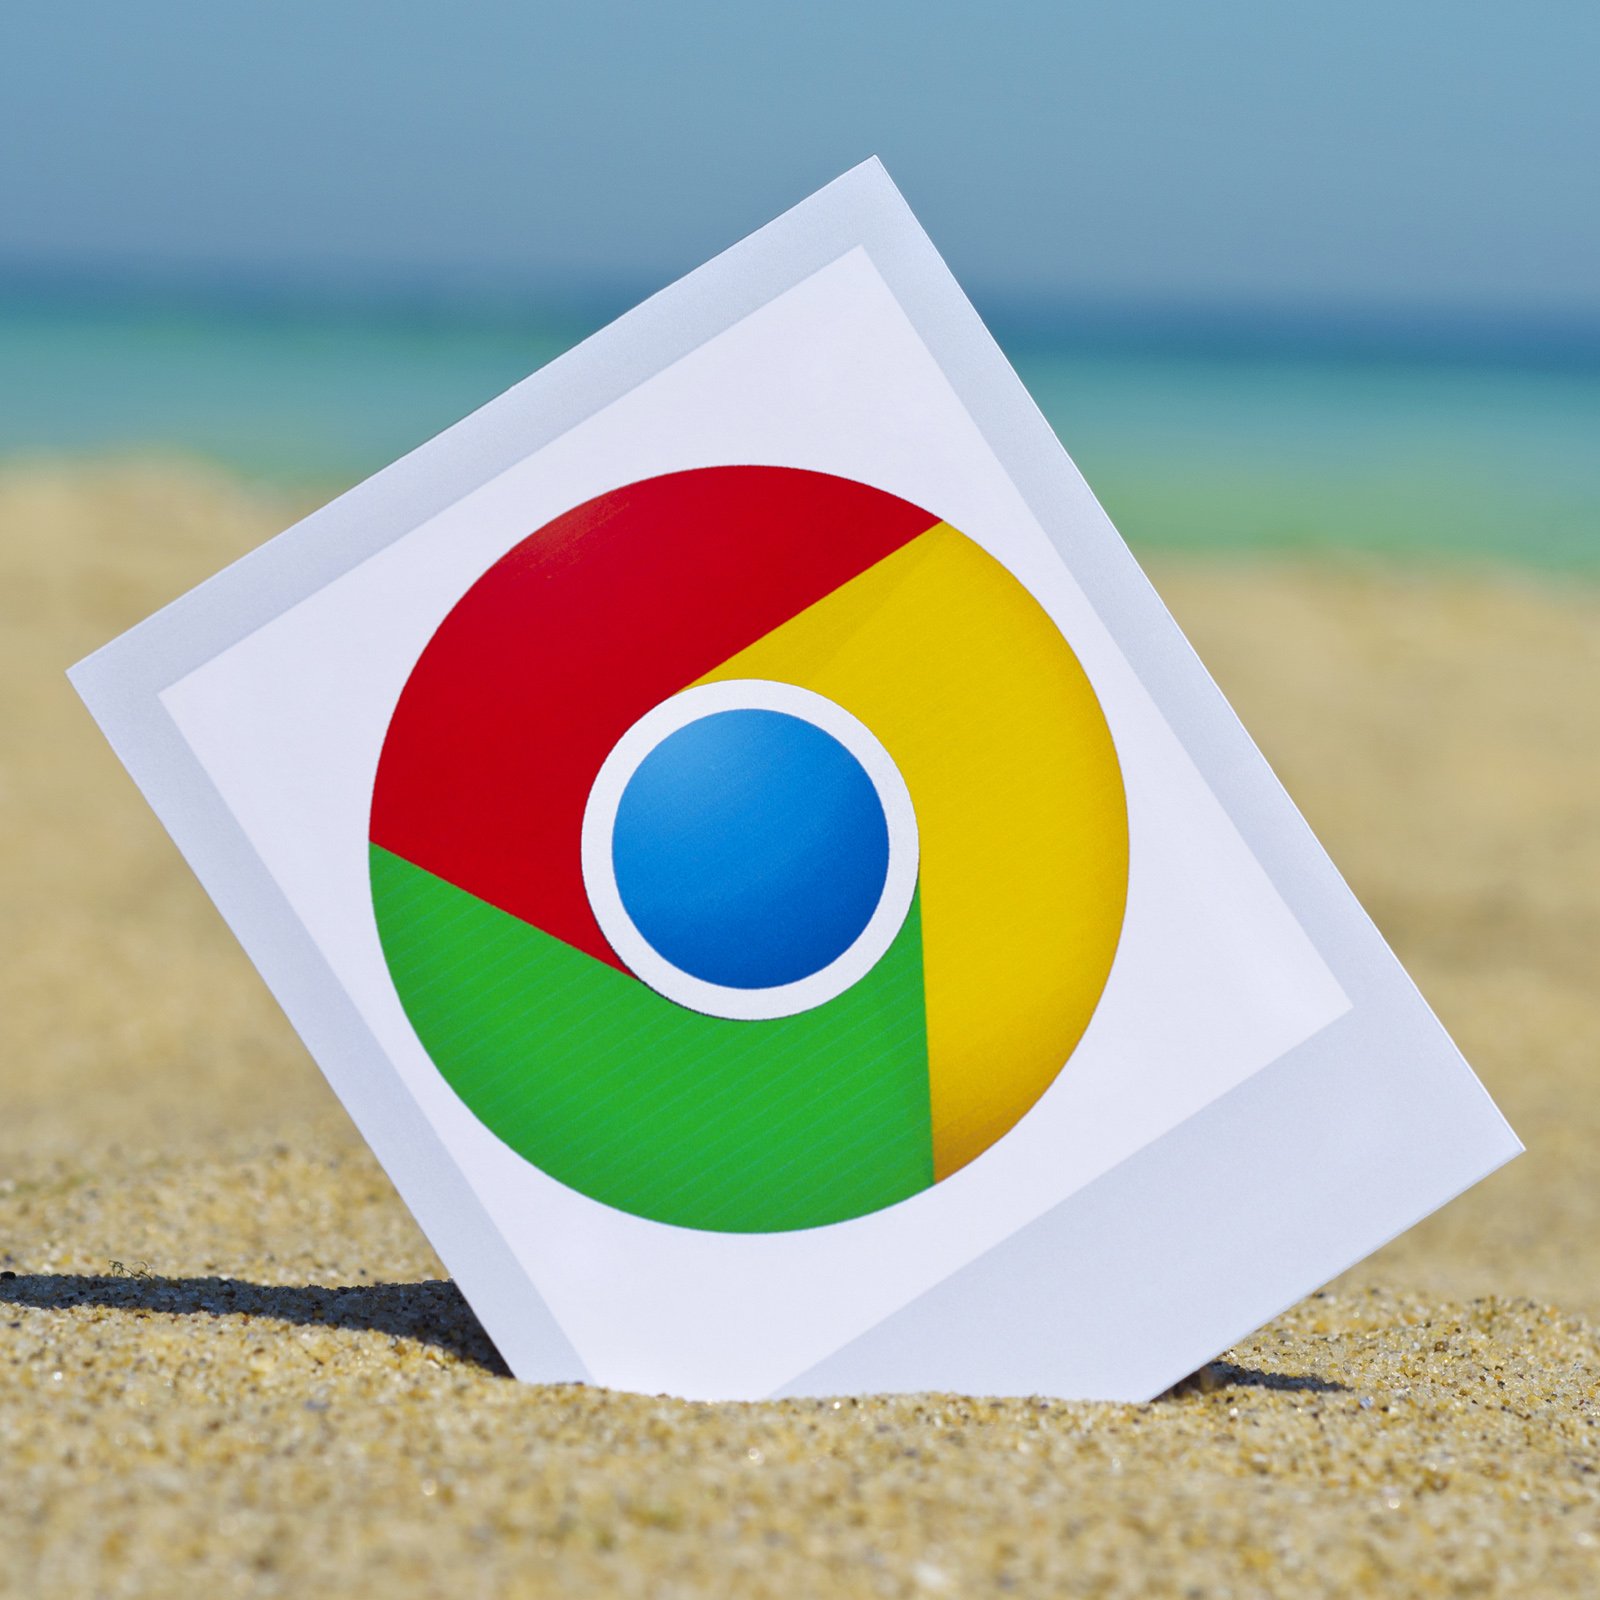 Chrome Extensions to Ensure Protection Against Miners and Hackers